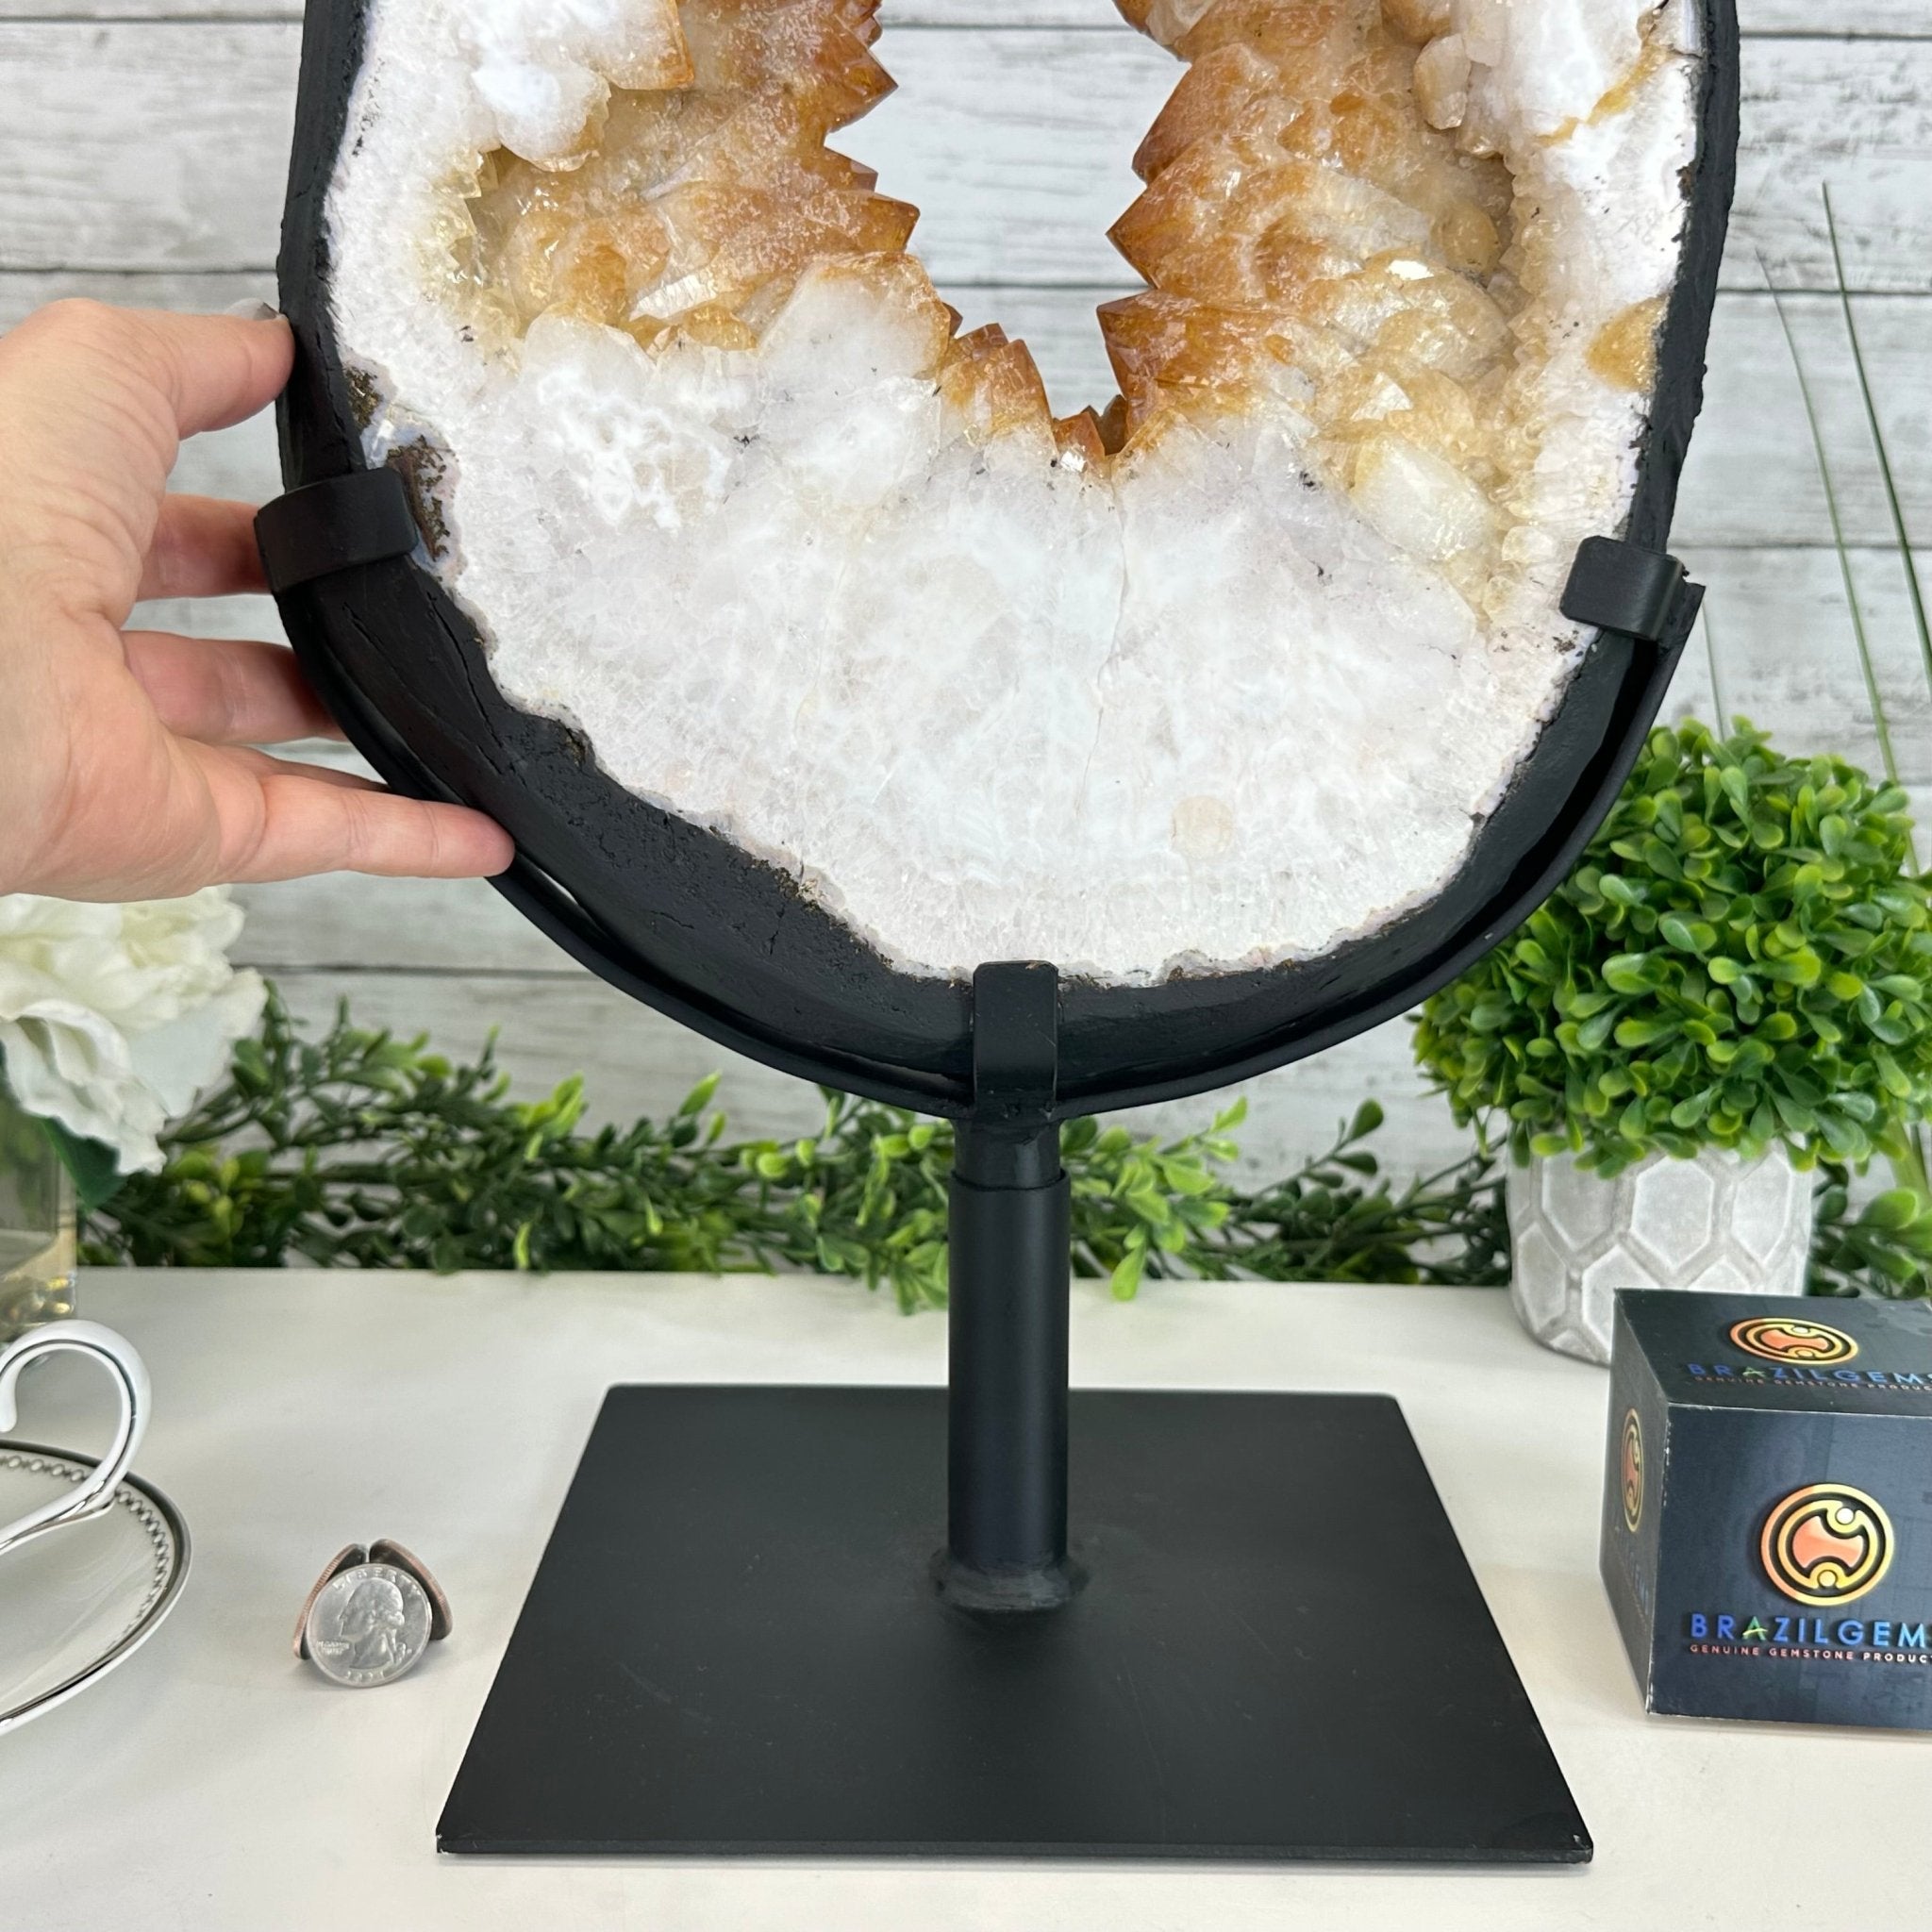 Citrine Portal on a Rotating Stand, 27.2 lbs & 17.7" tall #5625-0007 by Brazil Gems® - Brazil GemsBrazil GemsCitrine Portal on a Rotating Stand, 27.2 lbs & 17.7" tall #5625-0007 by Brazil Gems®Portals on Rotating Bases5625-0007